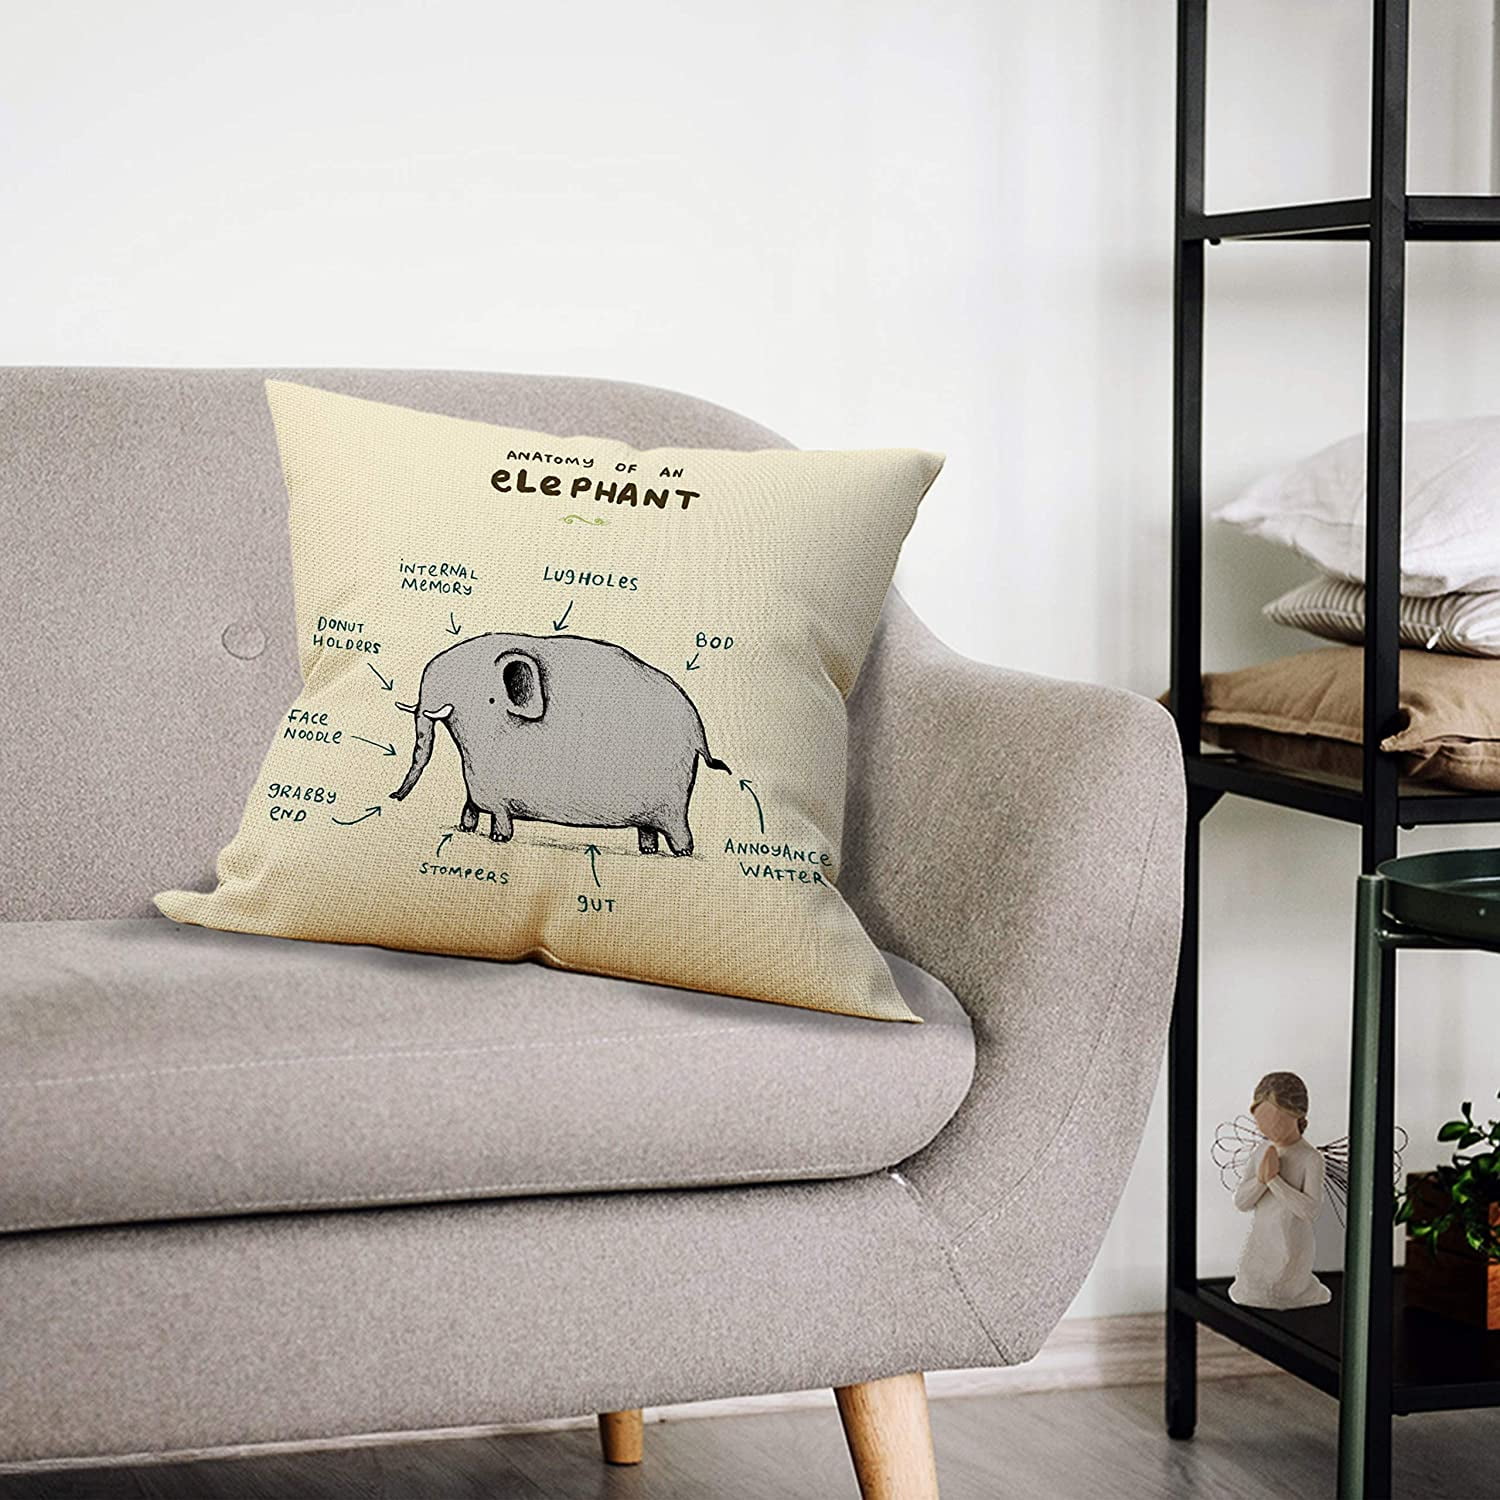 Funny Elephant Anatomy Map Throw Pillow Case Gifts Daughter Funny Elephant Decor Son Child Room Decor Elephant Lover Gifts 18 x 18 Inch Linen Cushion Cover for Sofa Couch Bed Nursery Decor